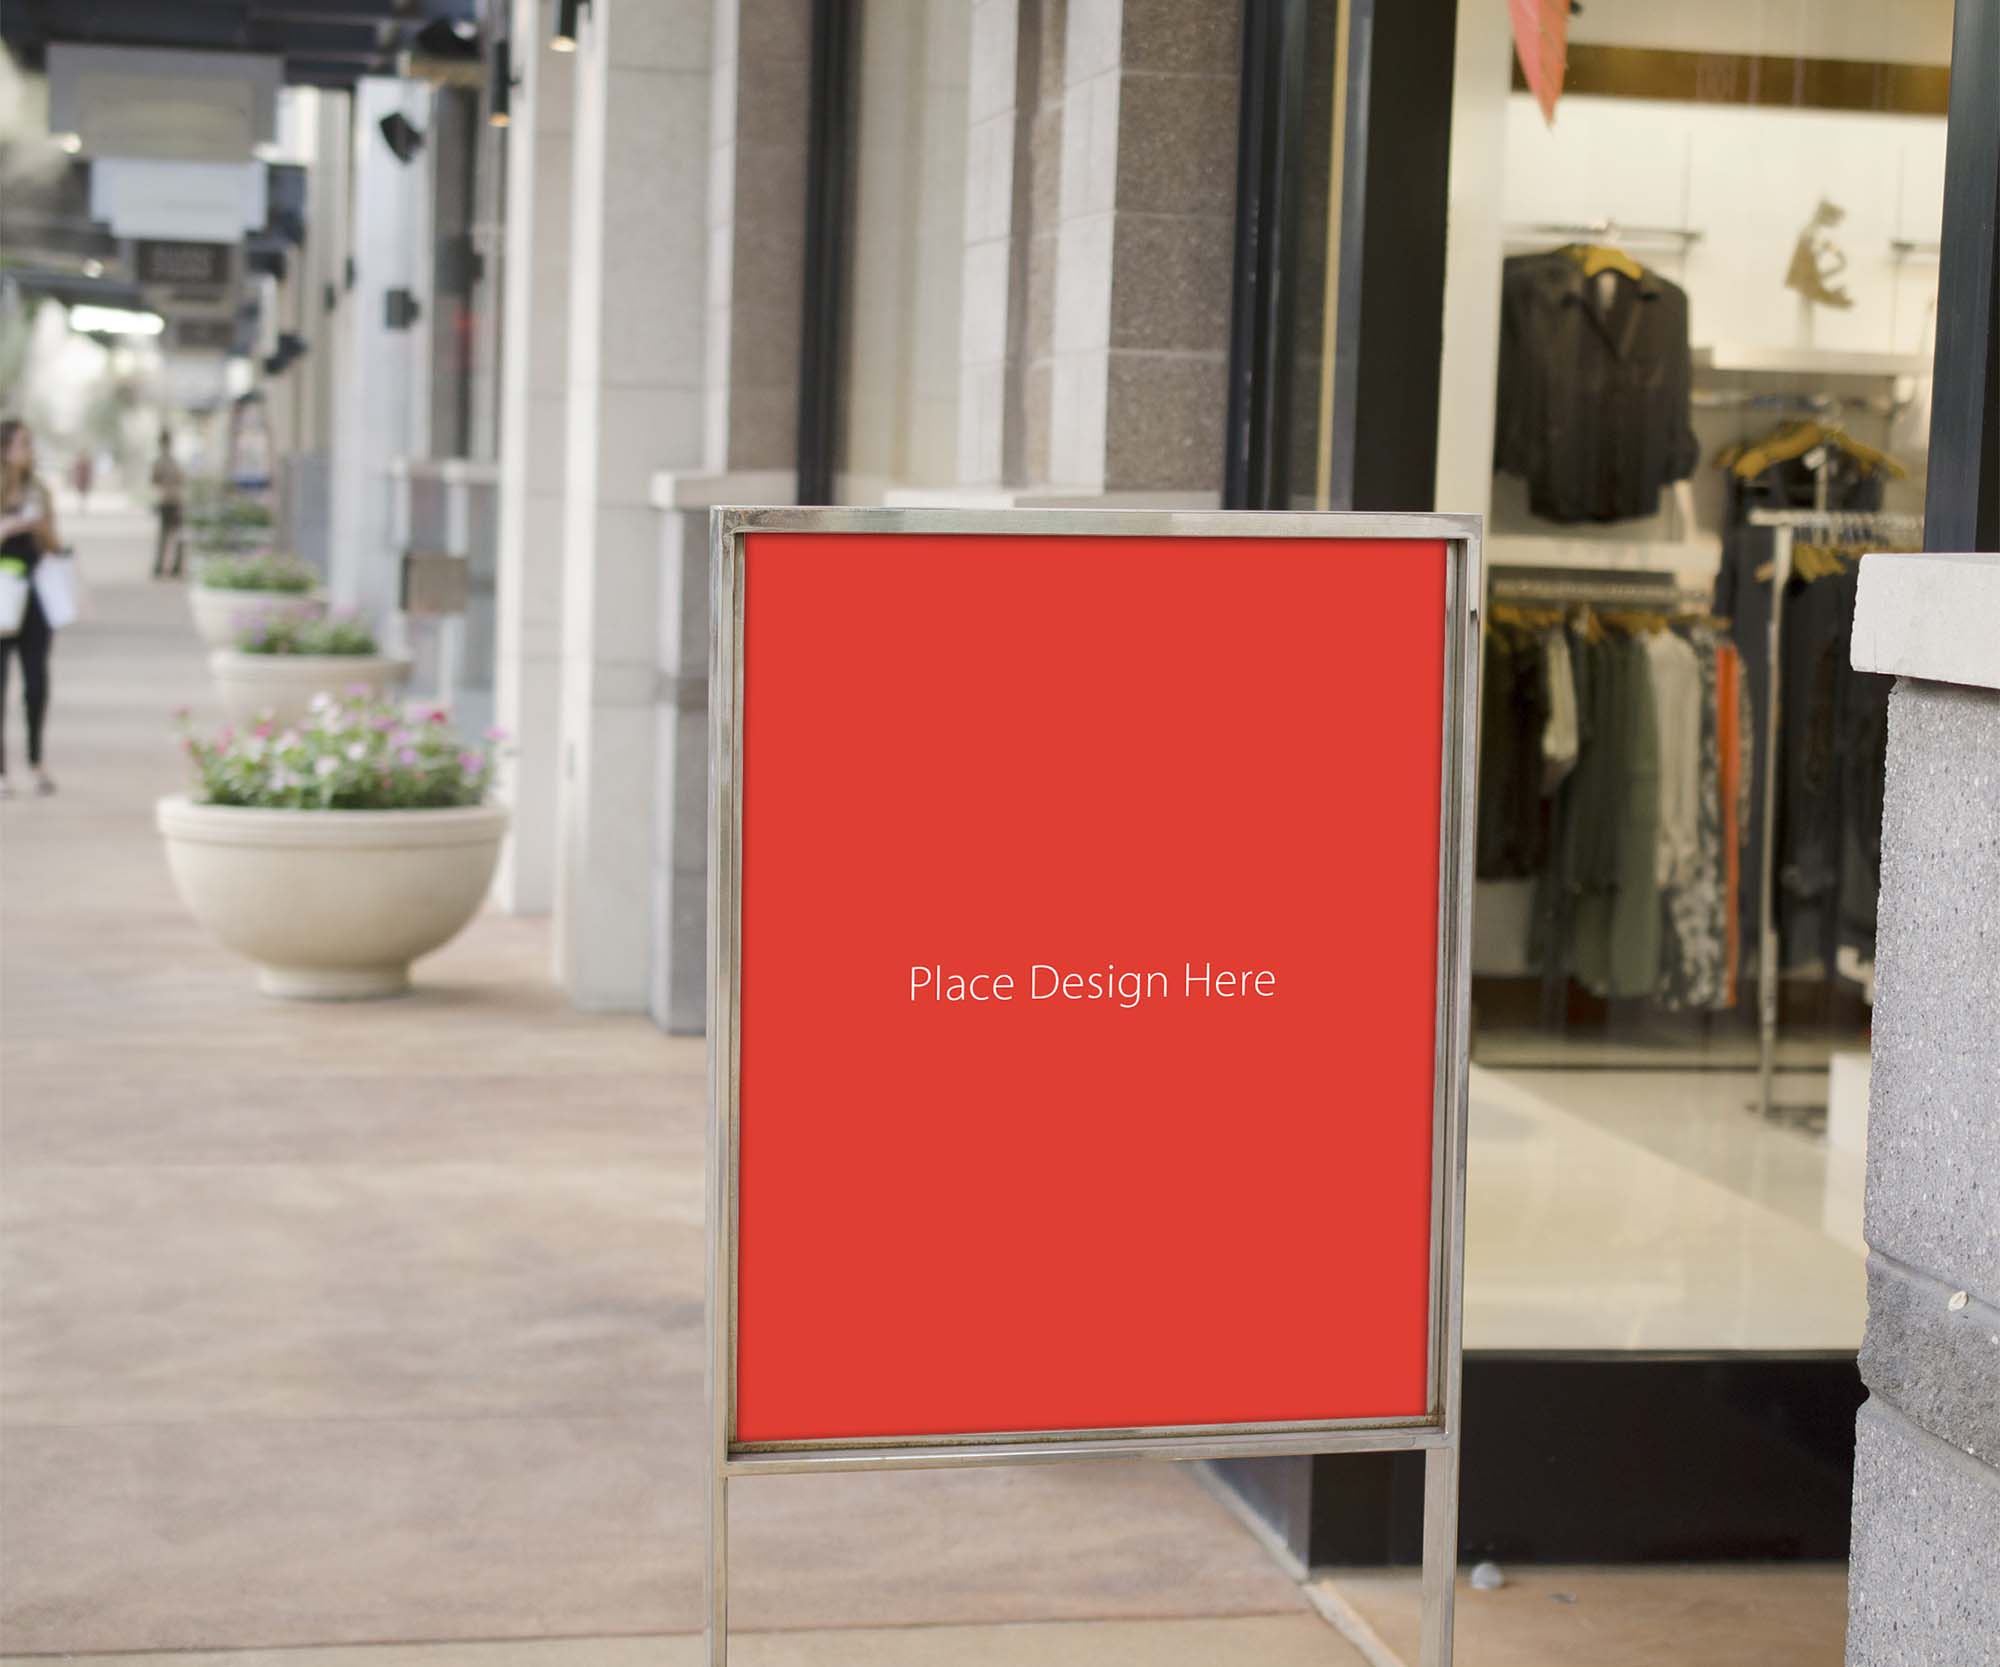 New Retail Store Sale Sign Mockup